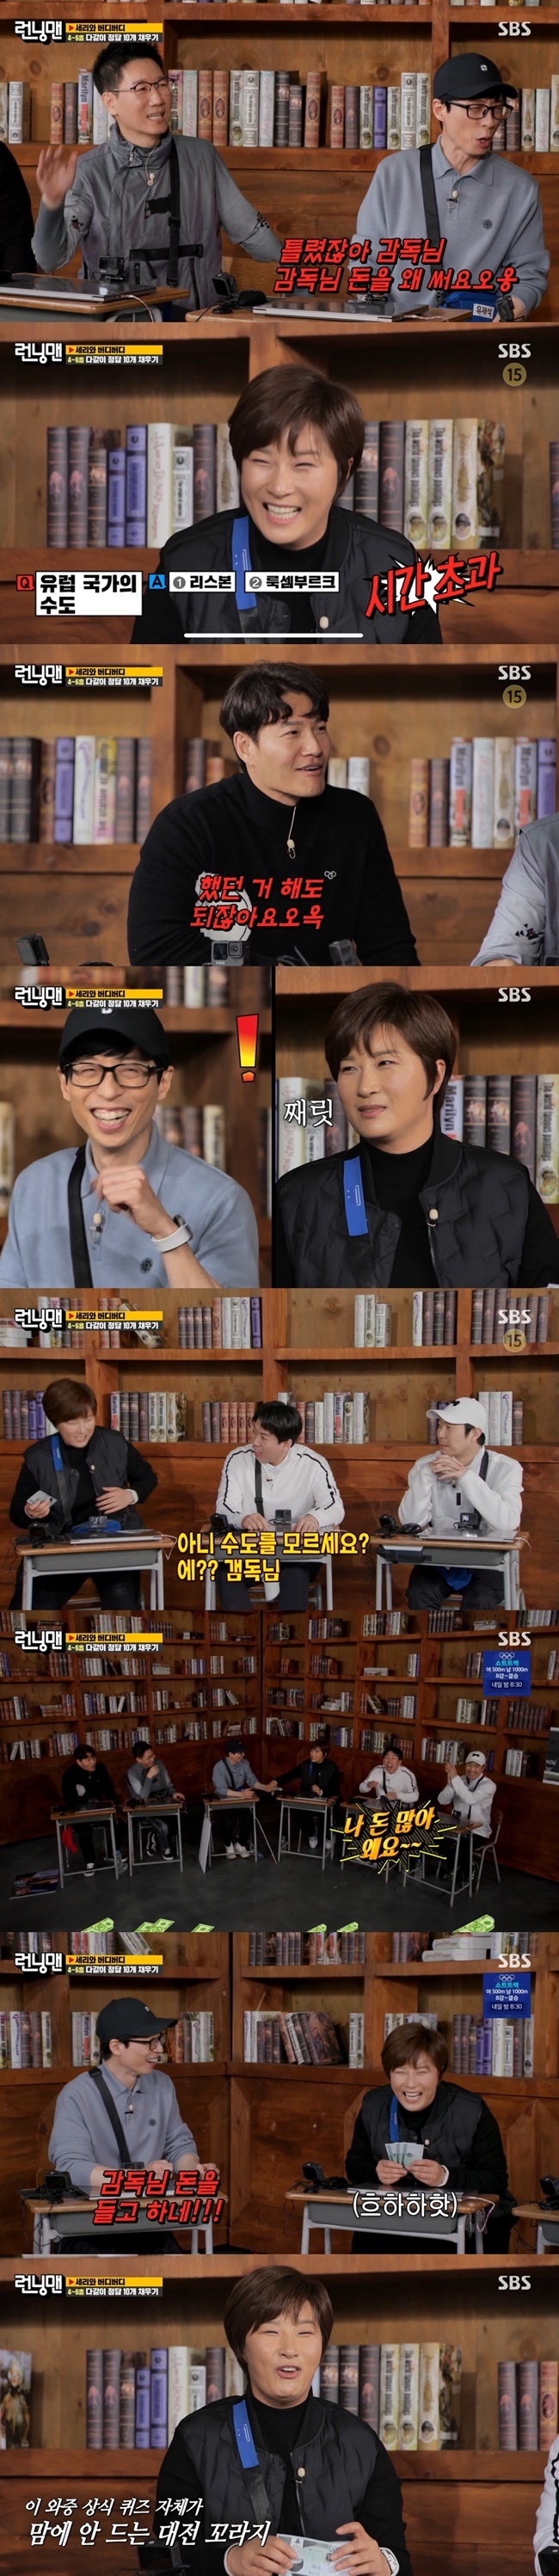 Former golfer Pak Se-ri has been left furious by the tumult of Yoo Jae-Suk.On SBS Running Man broadcast on February 6, Pak Se-ri appeared and was decorated with Serri and Birdie Buddy Race.Serri and Birdie Buddy Race must be all around the 18 holes of the mission as Pak Se-ri becomes entertainment manager.Five Running Man members are eligible for all penalties and can only be avoided by purchasing a penalty exemption.The funds will be paid when the 18-hole mission is carried out, and all the prize money will be distributed at will by Pak Se-ri.Both Pak Se-ri and the members carried out a ten-filling mission together; first the members named the Europe national capital.When Ji Suk-jin said the wrong answer, Yoo Jae-Suk laughed at the Why do you spend your money?It was the same problem but Pak Se-ri didnt answer.Then Kim Jong Kook said, I can do what I did. Yoo Jae-Suk said, I have brought out 10,000 won. Yang Se-chan also said, Do not you know the capital?, and Pak Se-ri responded, Yes I dont know.Yoo Jae-Suk gave names to several capitals for members who did not know the capital.At that moment, Pak Se-ri gave Yoo Jae-Suk a look, and Yoo Jae-Suk laughed, Director Pak Se-ri gave me a look.Then Pak Se-ri said, I was pissed off for a moment, and laughed.The next problem was the name of the Asian city, except Korea; Pak Se-ri burst into a smirk after shouting Malaysia.Yoo Jae-Suk teased him, saying, Im taking the money, and Pak Se-ri responded, Im a lot of money. In the same next issue, Haha mentioned Shinjuku.In the wrong answer of Haha, Yoo Jae-Suk was embarrassed, saying, It is a neighborhood like a street.In the question of having to name Europe, Haha proudly cried out wrong: Who was Canada next to him.Why do you change suddenly when you are in the water? Yang Se-chan said, What can I do? And Ji Suk-jin said, Europe is just a matter of giving.In the meantime, Pak Se-ri said, I hate the most about the water, the europe, and the capital.